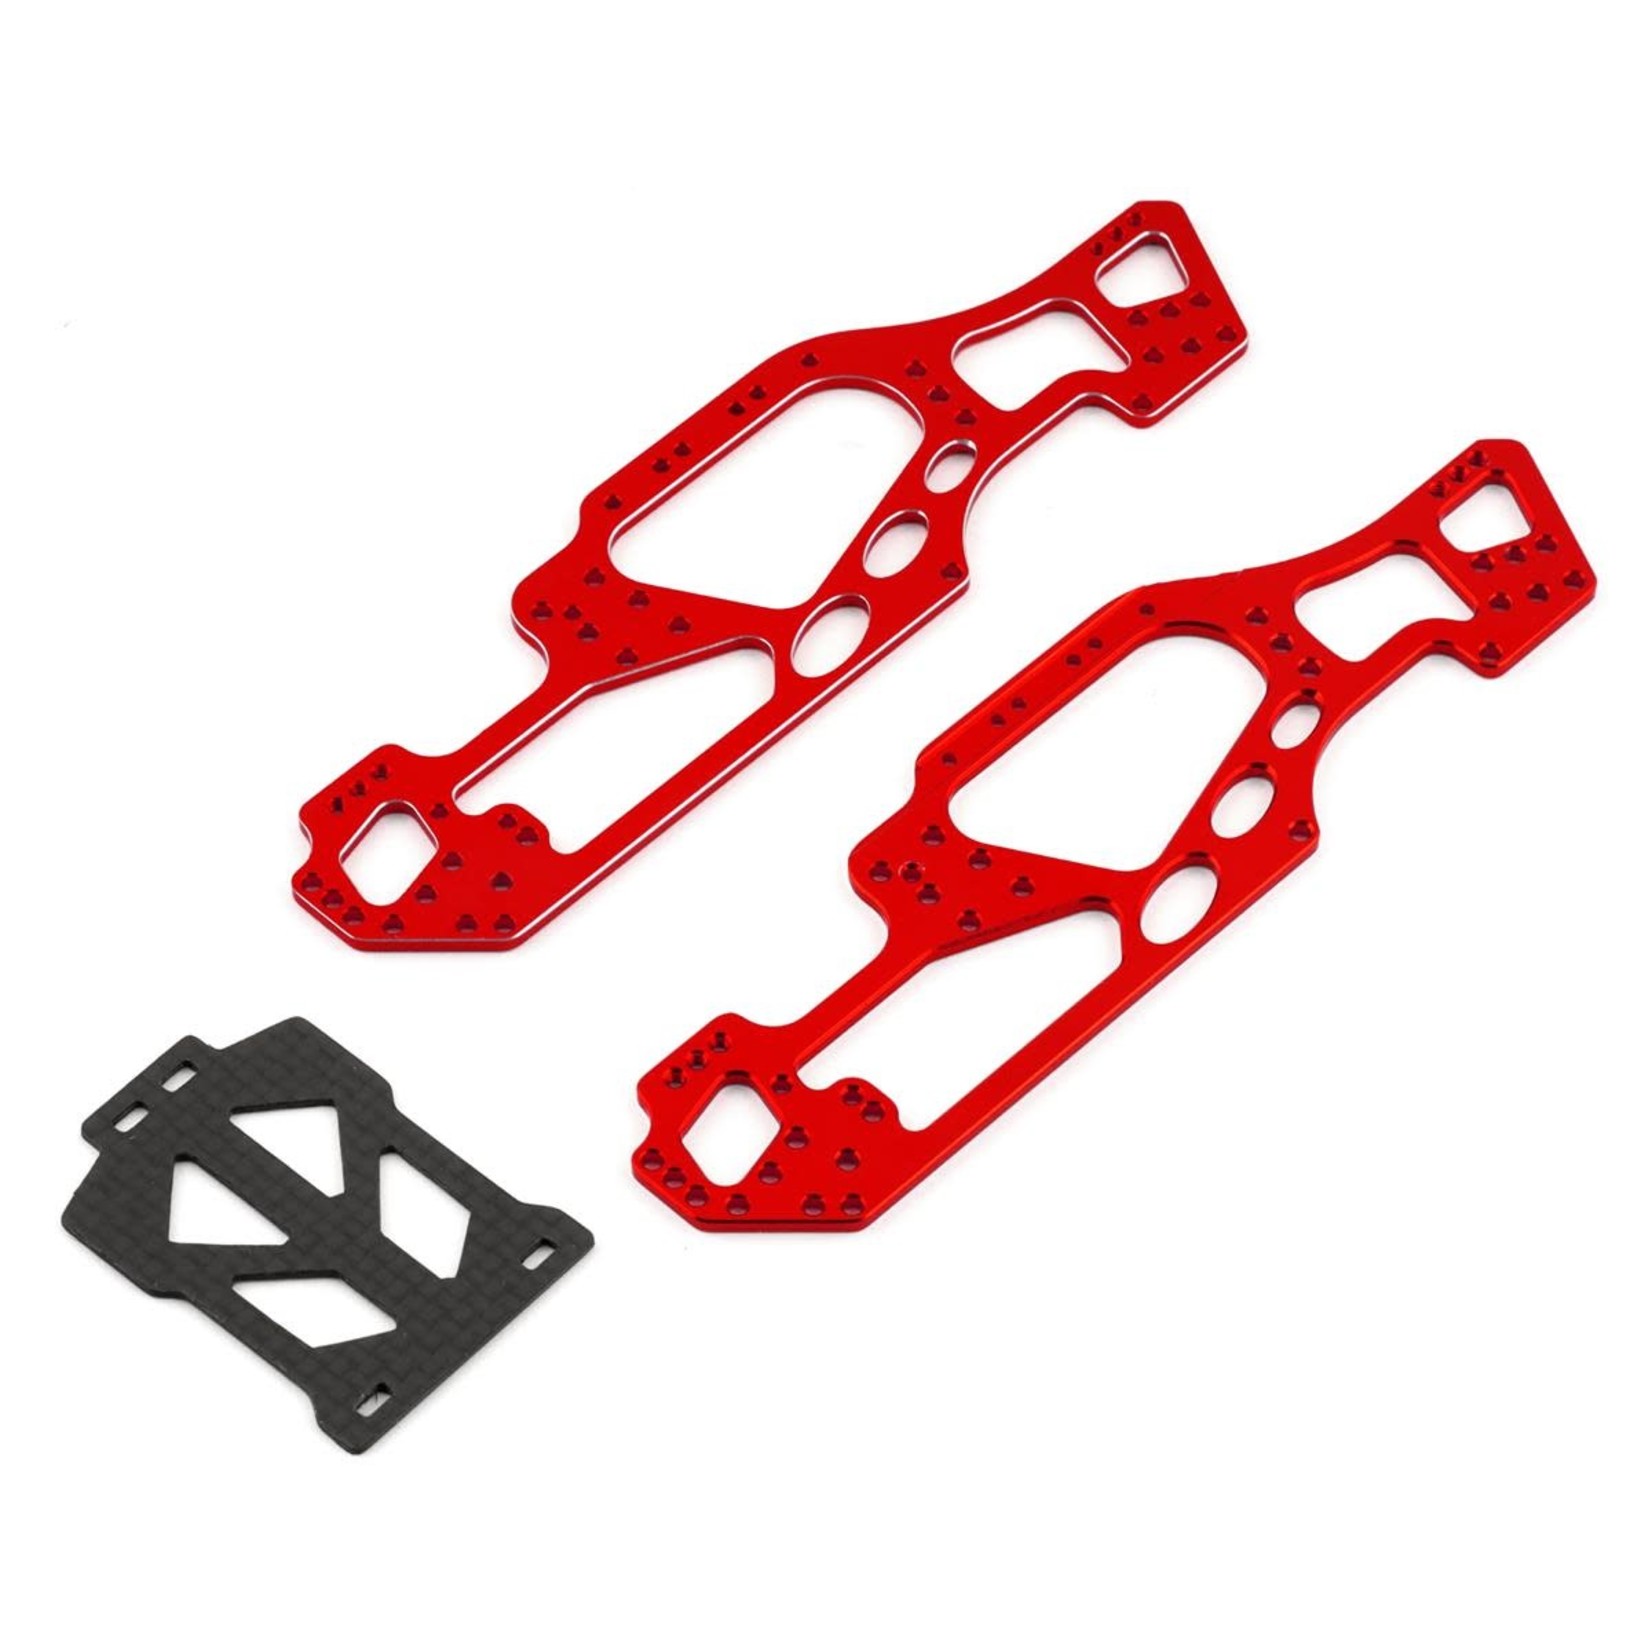 NEXX Racing NEXX Racing Madbull Cantilever Suspension Aluminum Chassis (Red) #NX-292-R